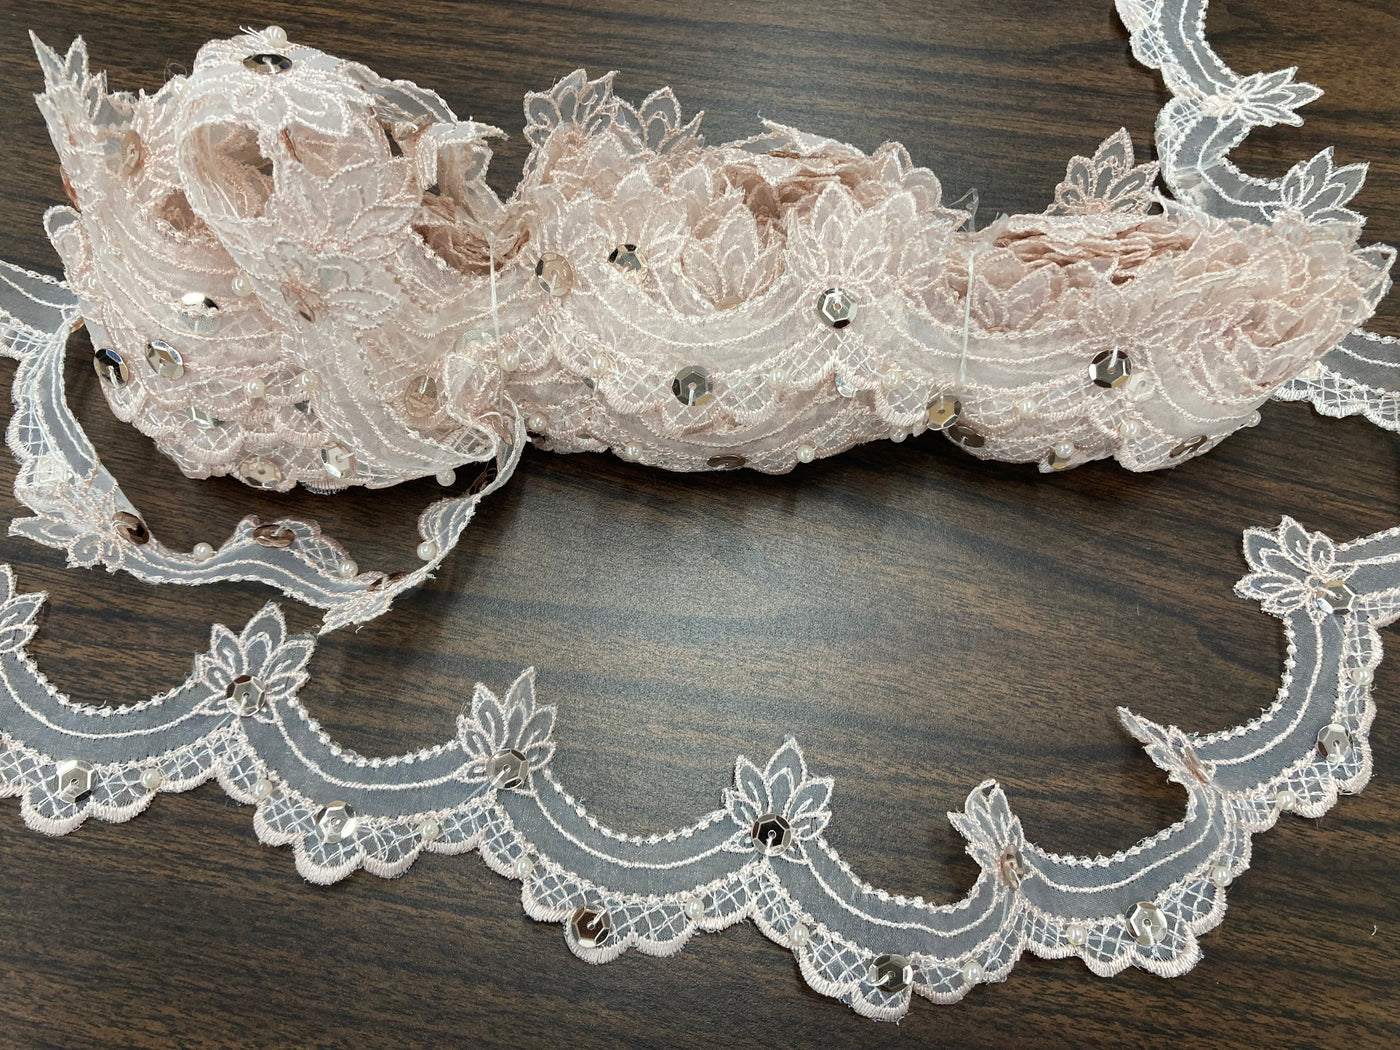 Beaded Blush Lace Trim Embroidered on 100% Polyester Organza . Large Arch Scalloped Trim. Formal Trim. Perfect for Edging and Gowns.  Sold by the Yard.  Lace Usa